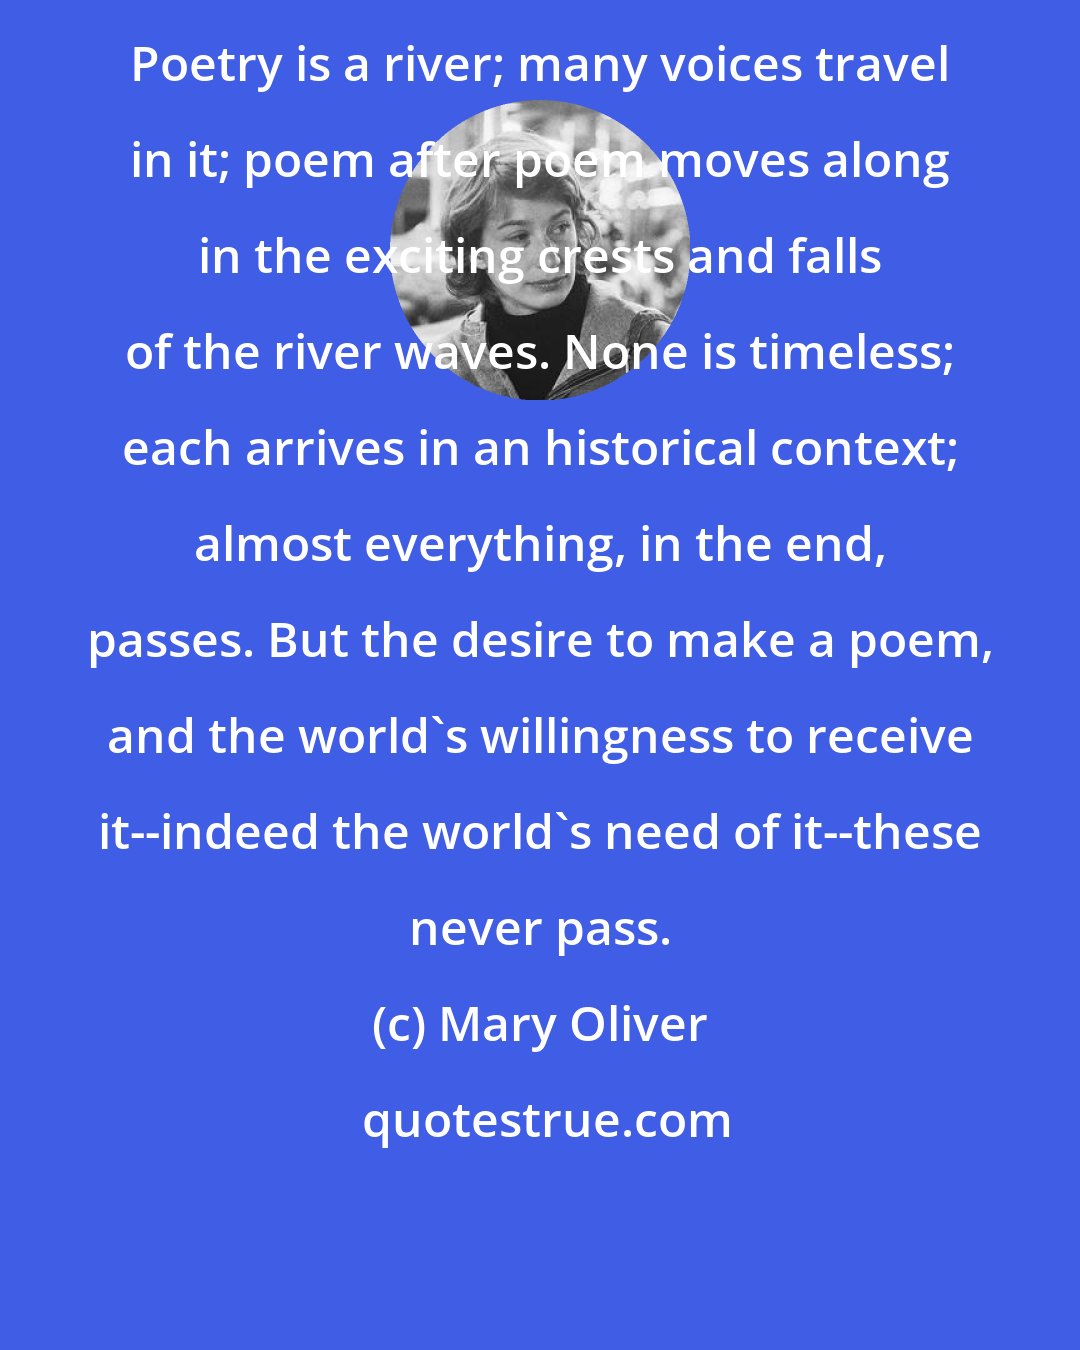 Mary Oliver: Poetry is a river; many voices travel in it; poem after poem moves along in the exciting crests and falls of the river waves. None is timeless; each arrives in an historical context; almost everything, in the end, passes. But the desire to make a poem, and the world's willingness to receive it--indeed the world's need of it--these never pass.